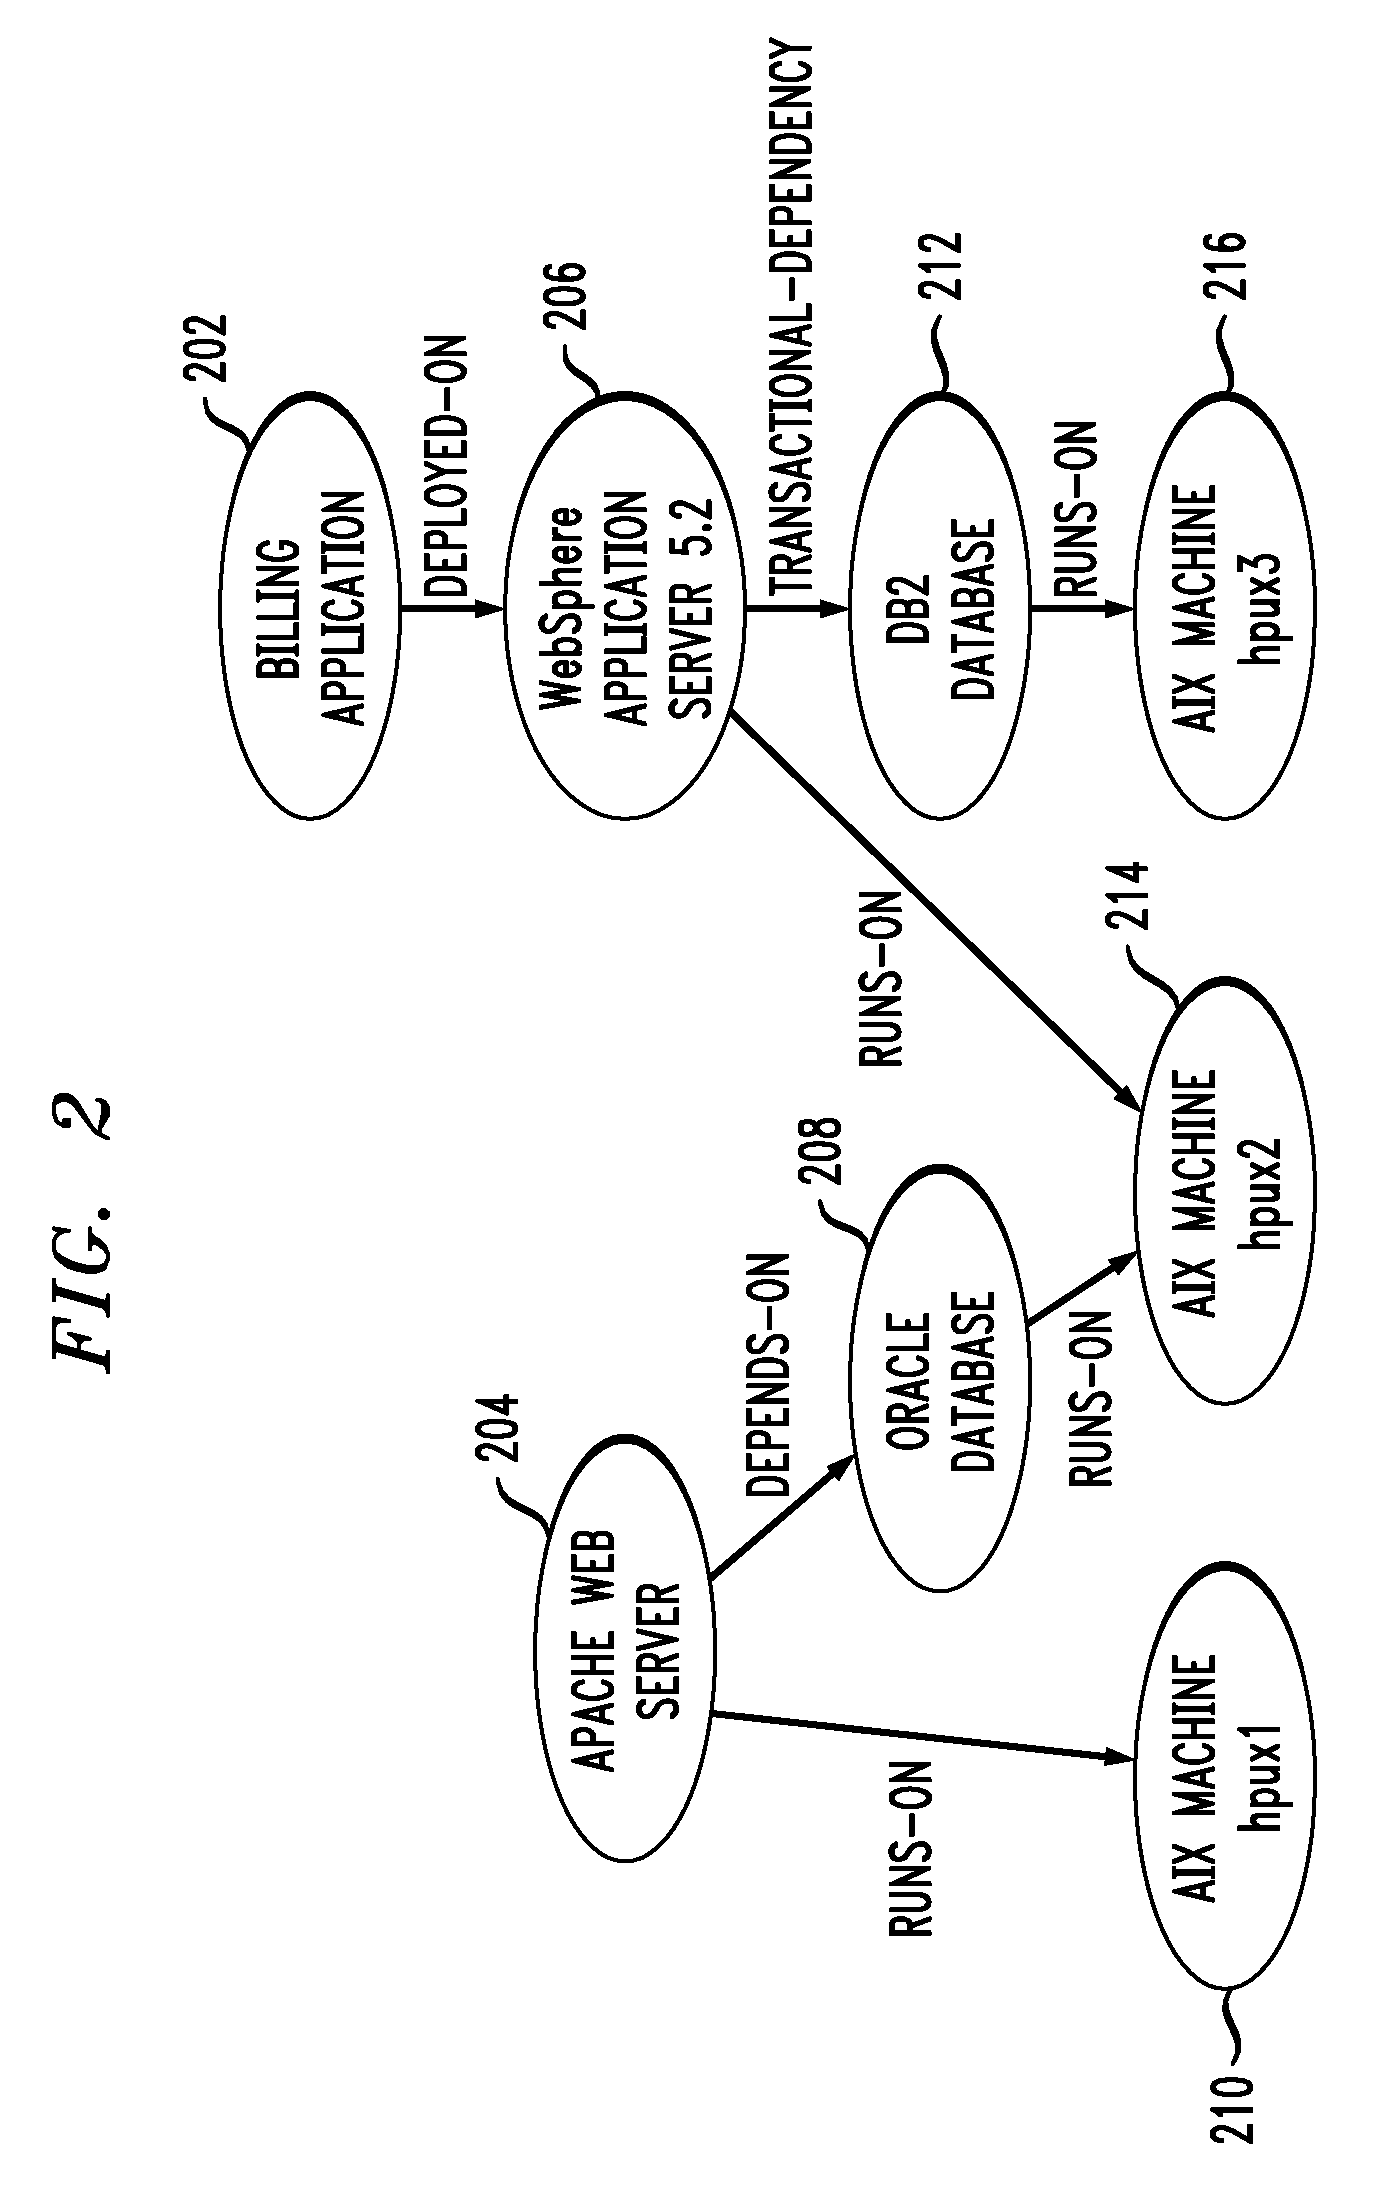 Method for associating configuration items to incidents